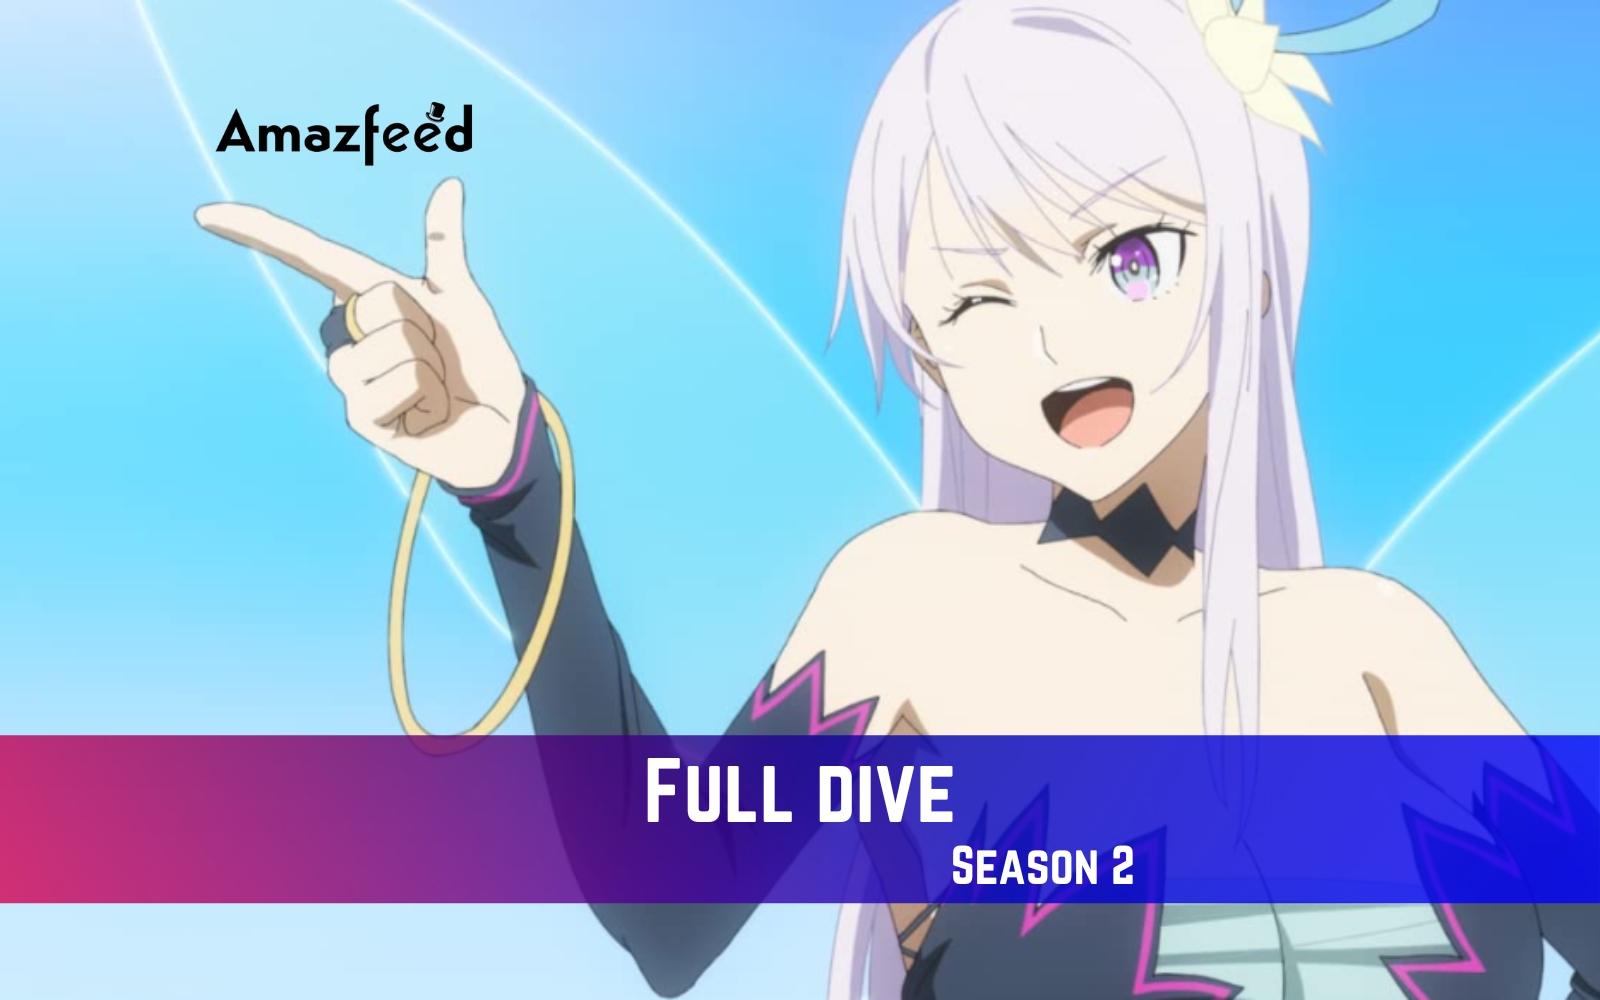 Full Dive Season 2: Will There Be A Sequel? Everything To Know